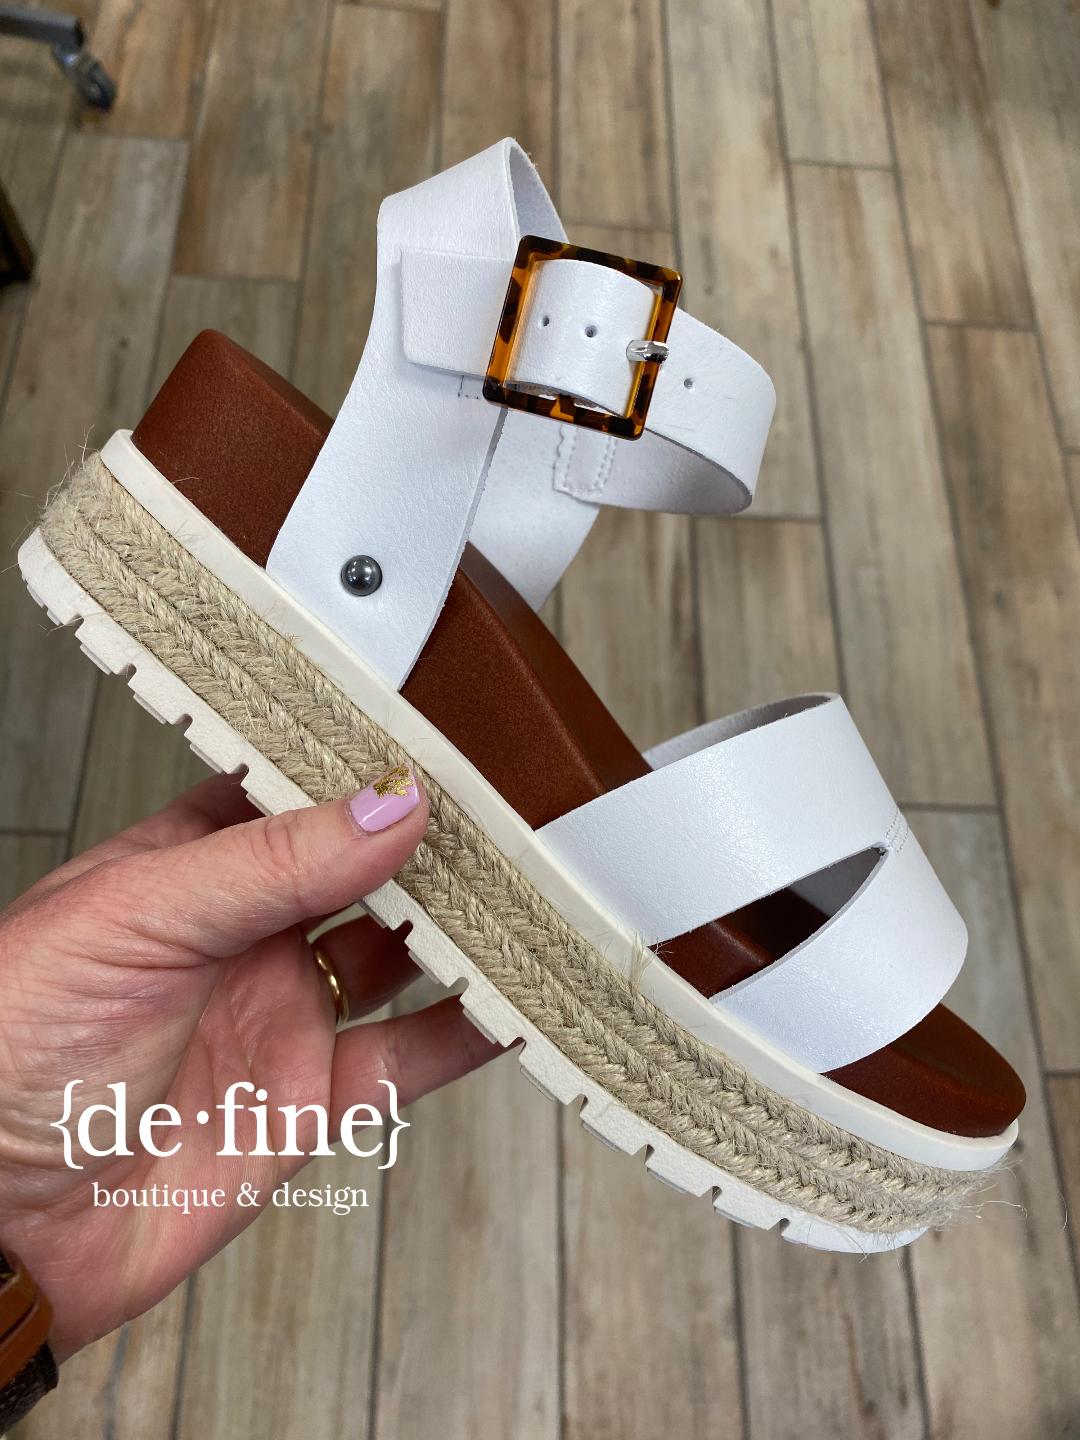 Mia Evana White Flatform Sandal with Rope Accents